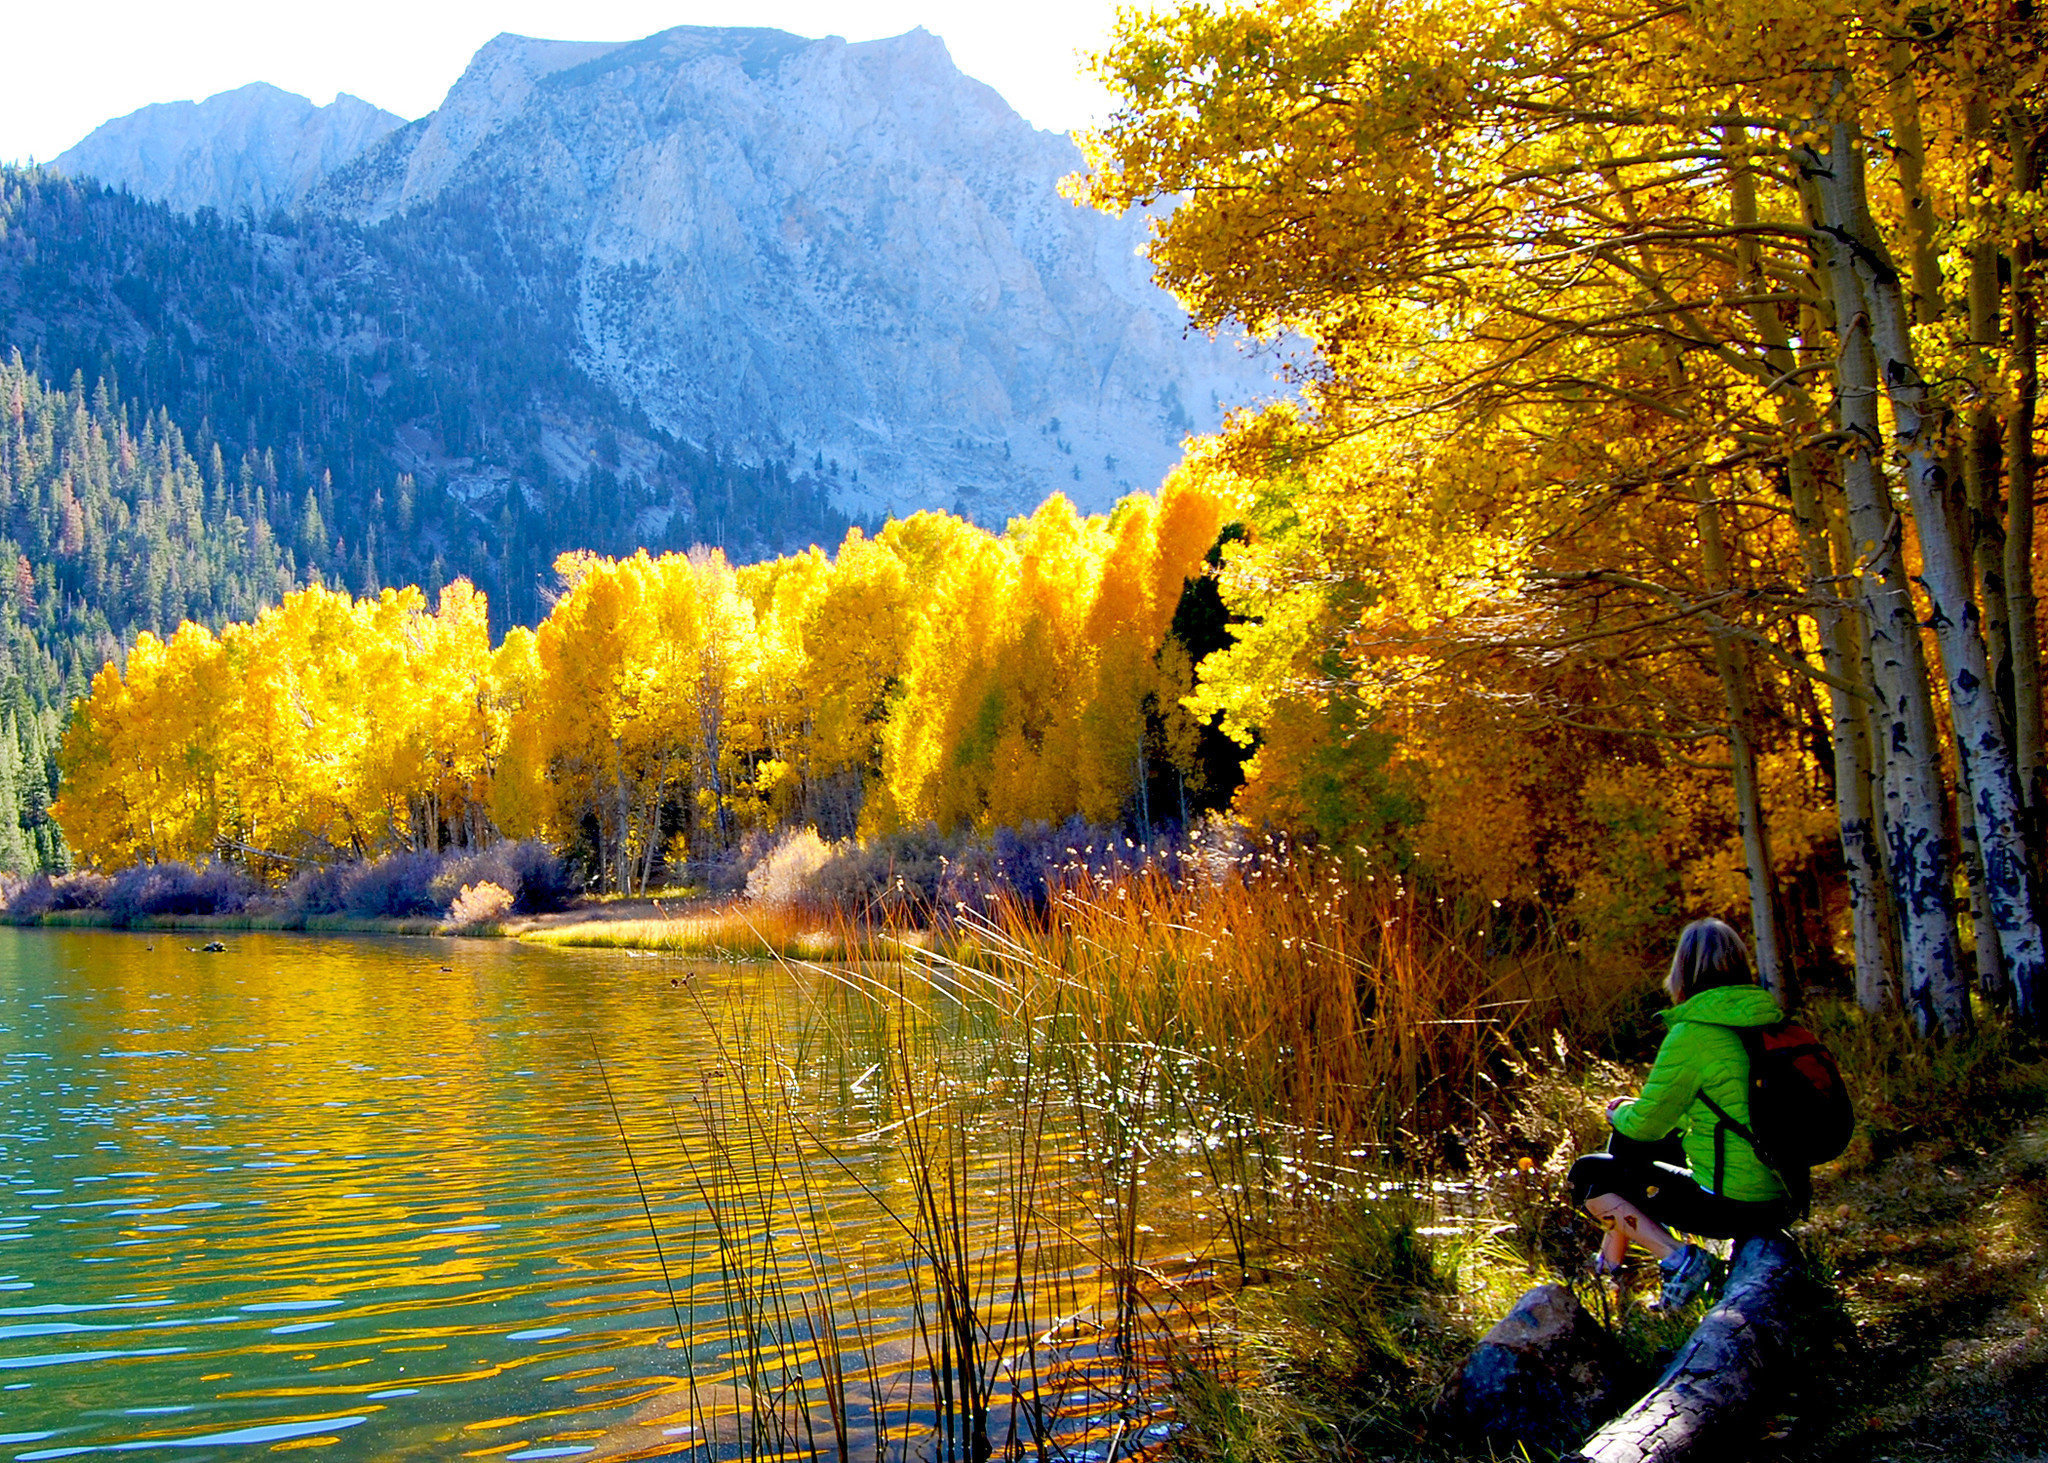 California: Plumas County claims fall color crown this weekend - LA Times